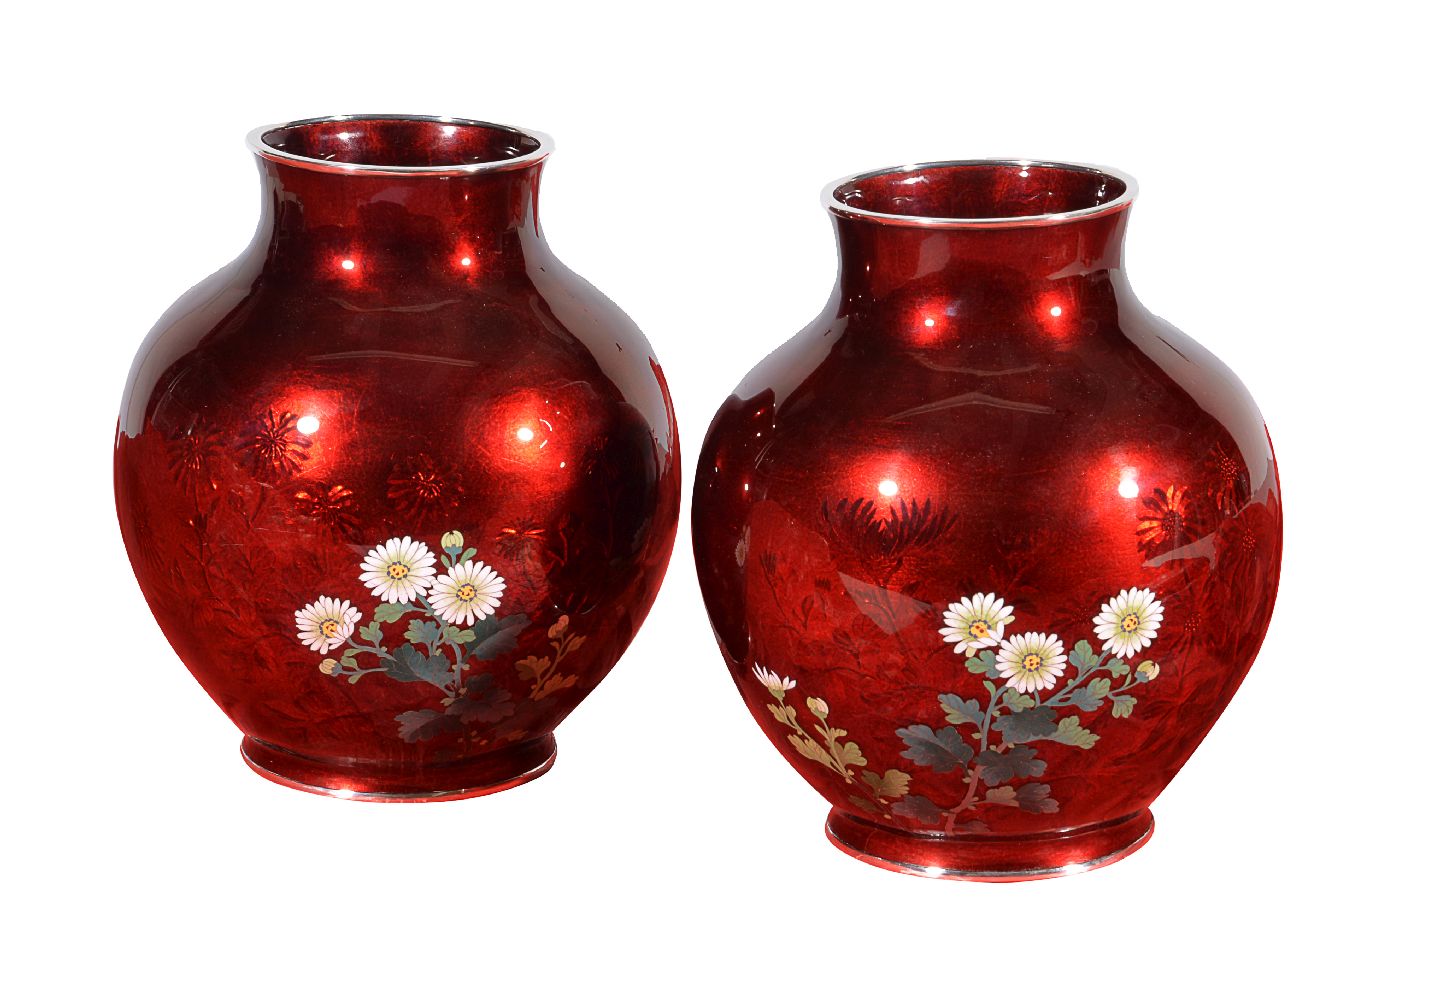 Ando Company: A Pair of Cloisonné Enamel Vases - Image 2 of 3